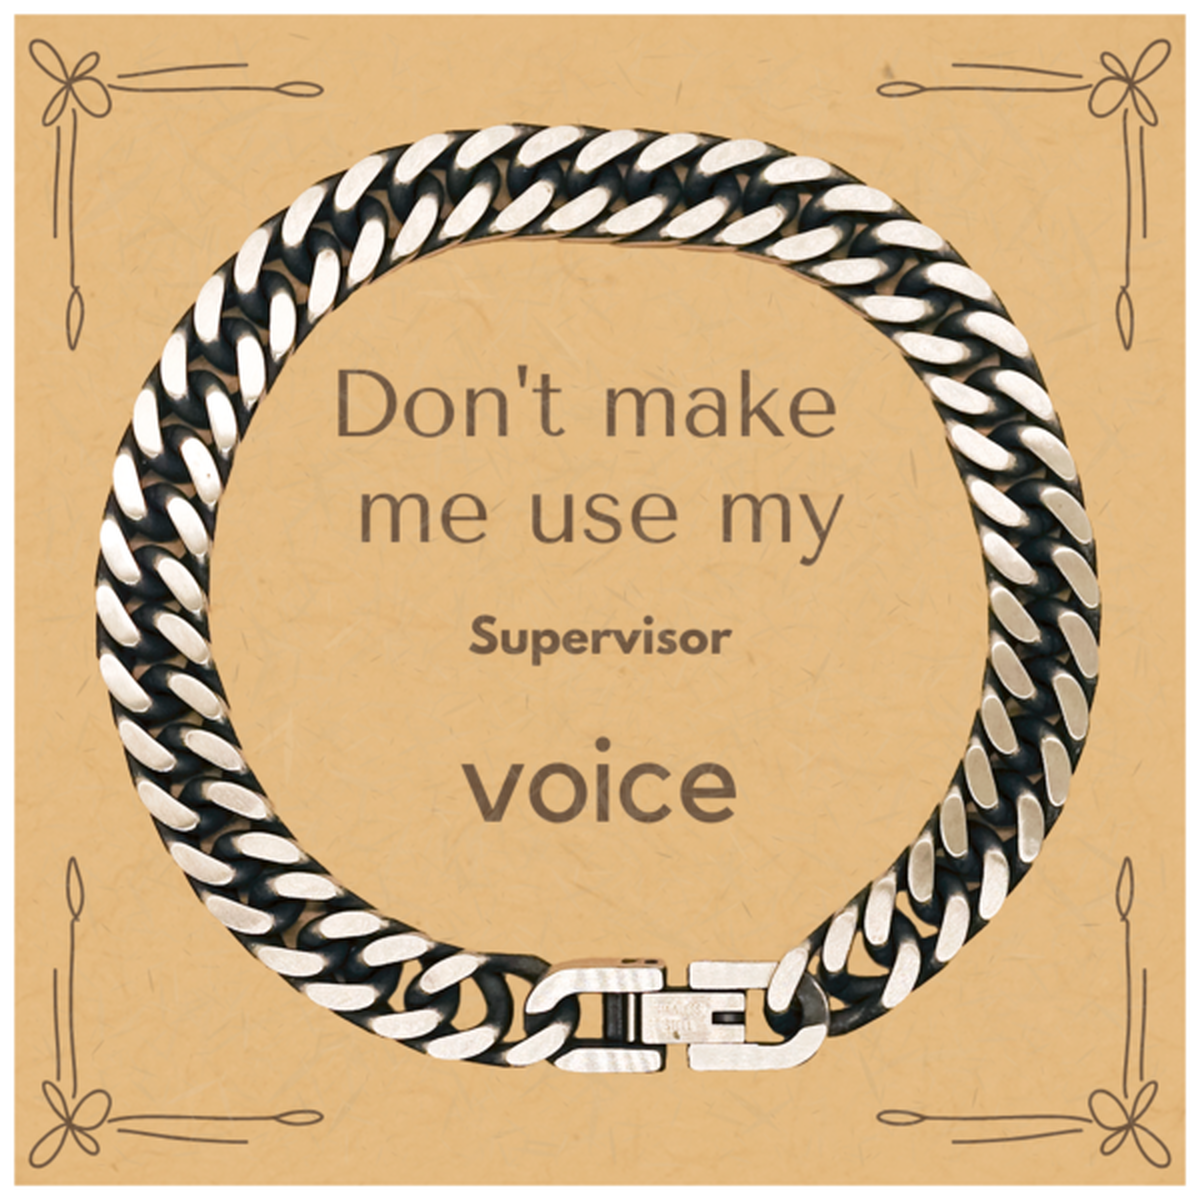 Don't make me use my Supervisor voice, Sarcasm Supervisor Card Gifts, Christmas Supervisor Cuban Link Chain Bracelet Birthday Unique Gifts For Supervisor Coworkers, Men, Women, Colleague, Friends